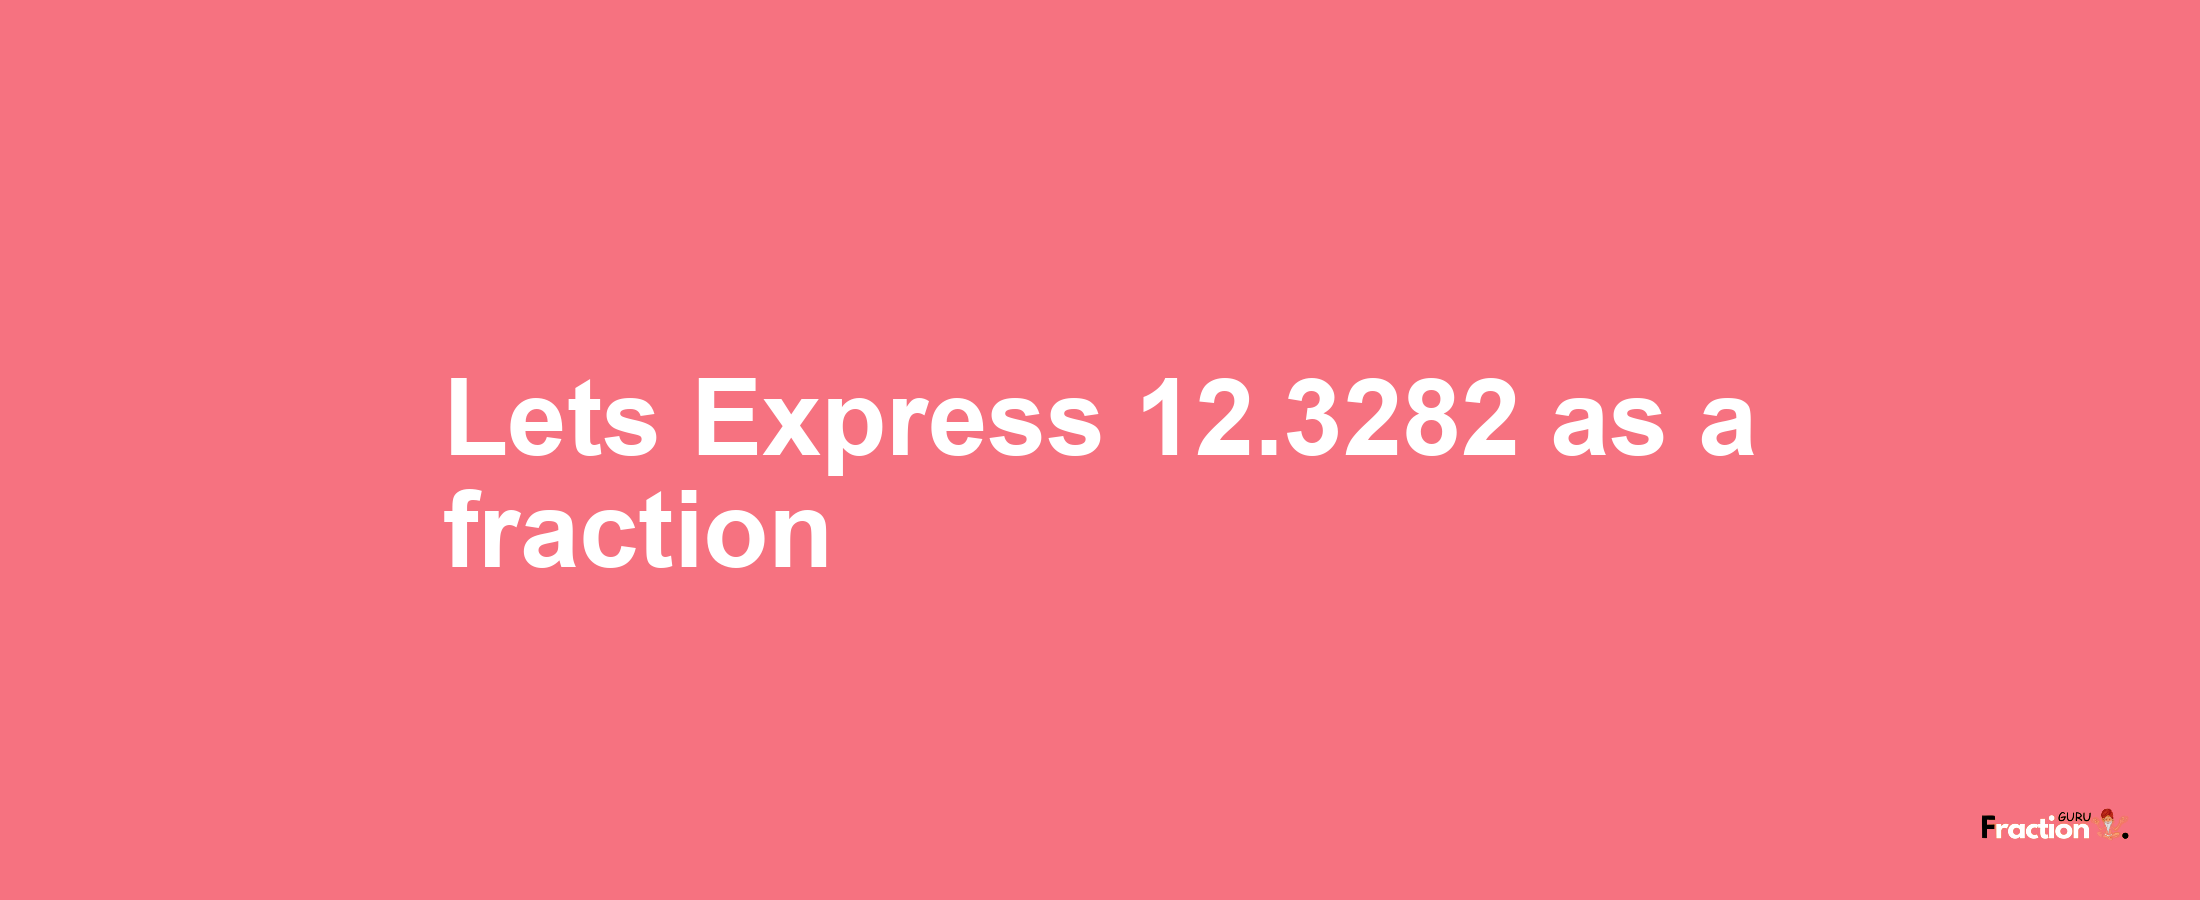 Lets Express 12.3282 as afraction